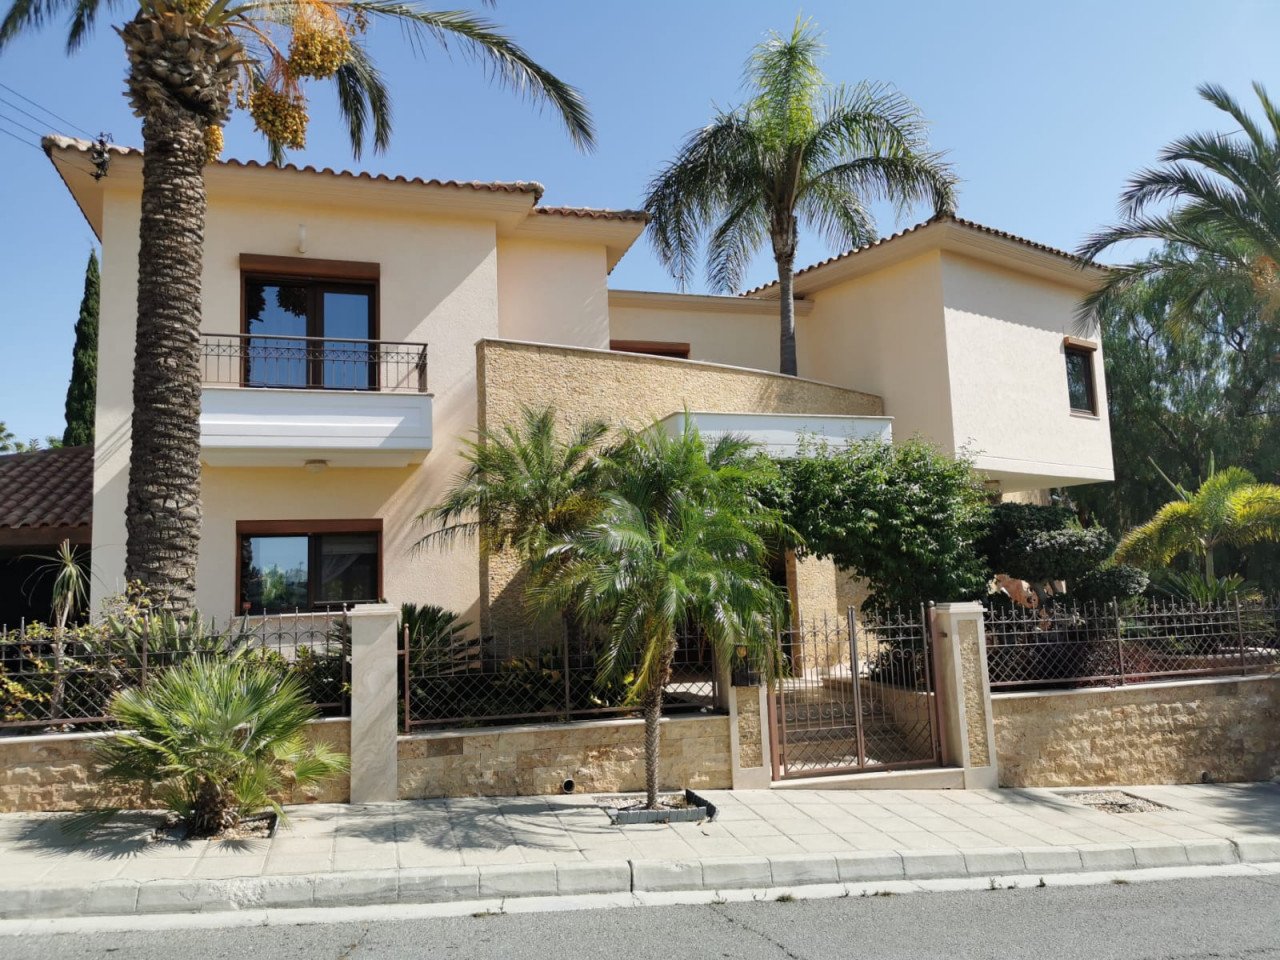 Property for Rent: House (Detached) in Mesovounia, Limassol for Rent | Key Realtor Cyprus